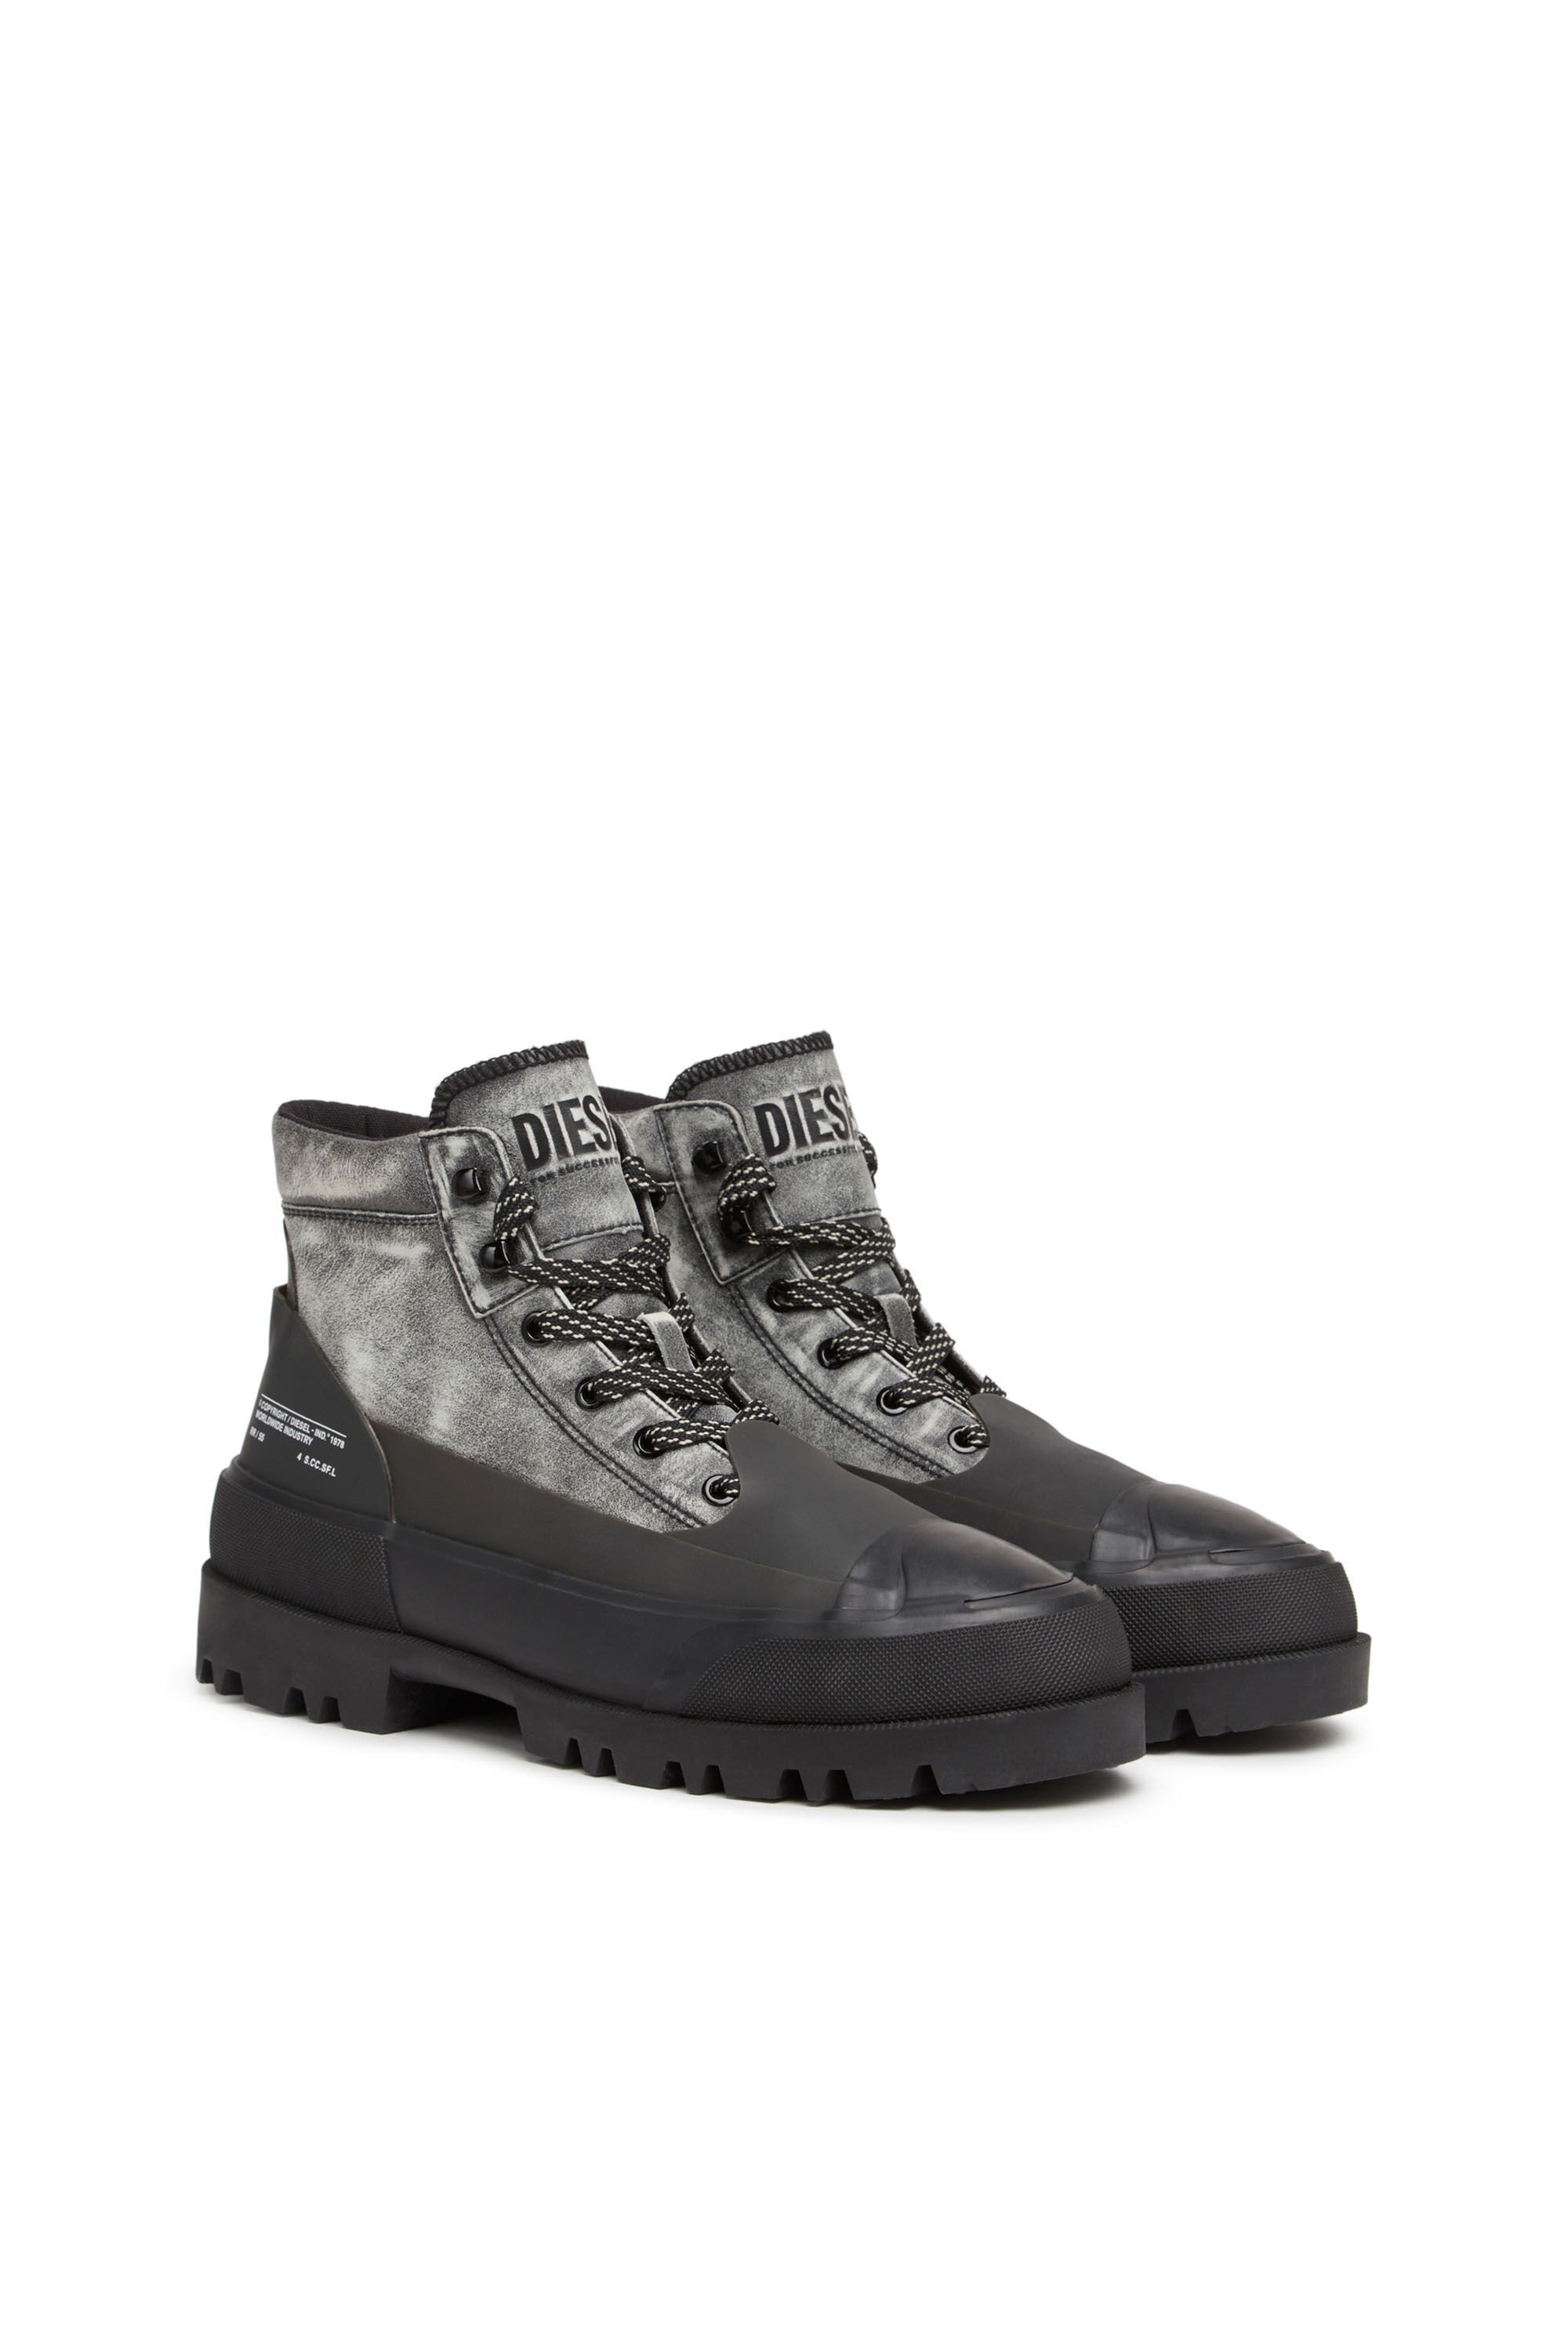 Women's D-Hiko BT X - Treated leather boots with rubber overlay 